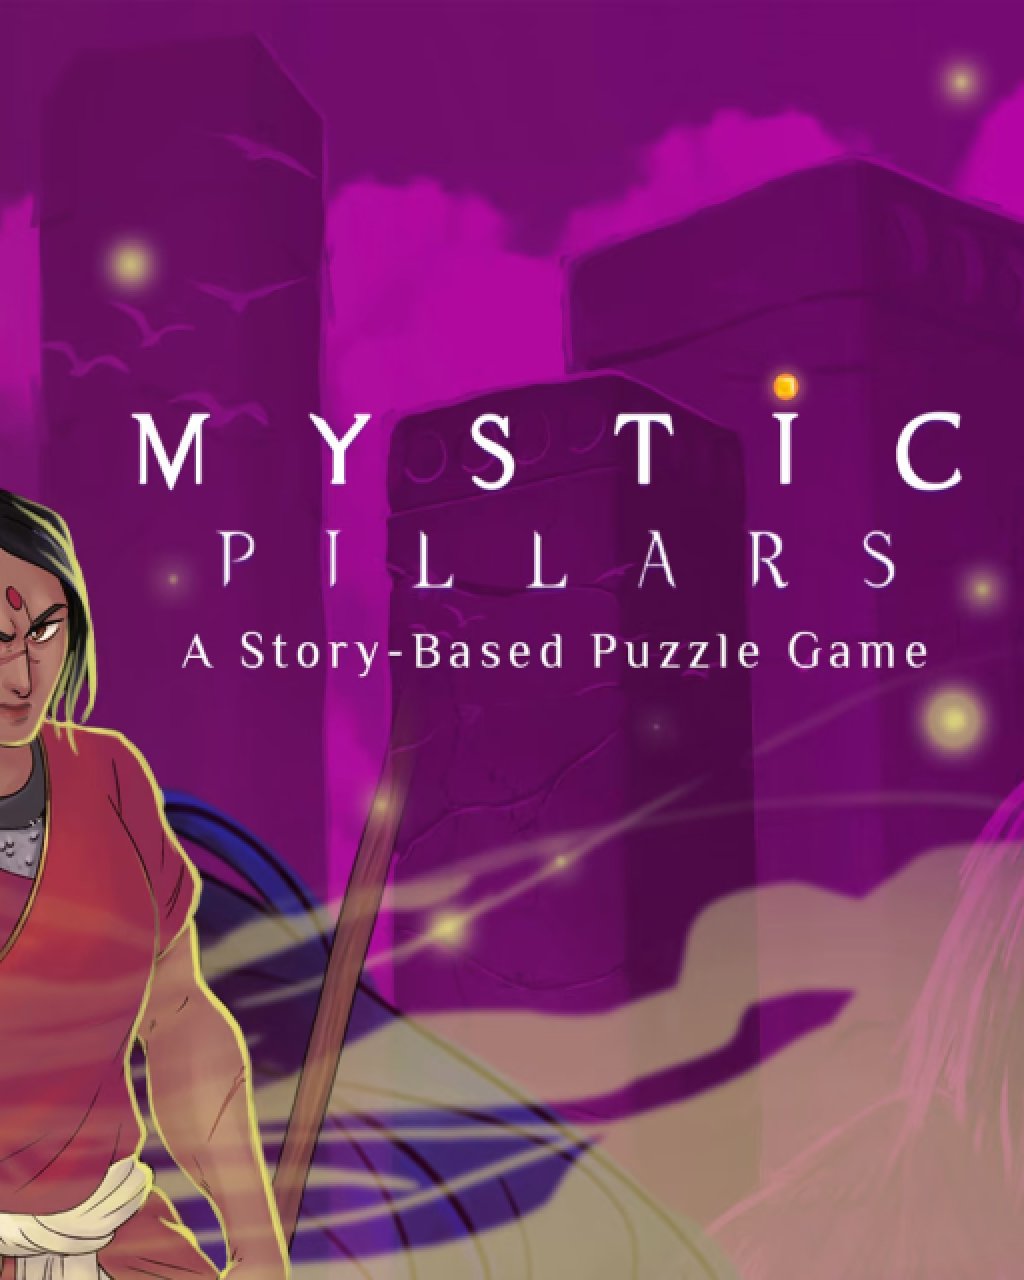 ESD Mystic Pillars A Story-Based Puzzle Game